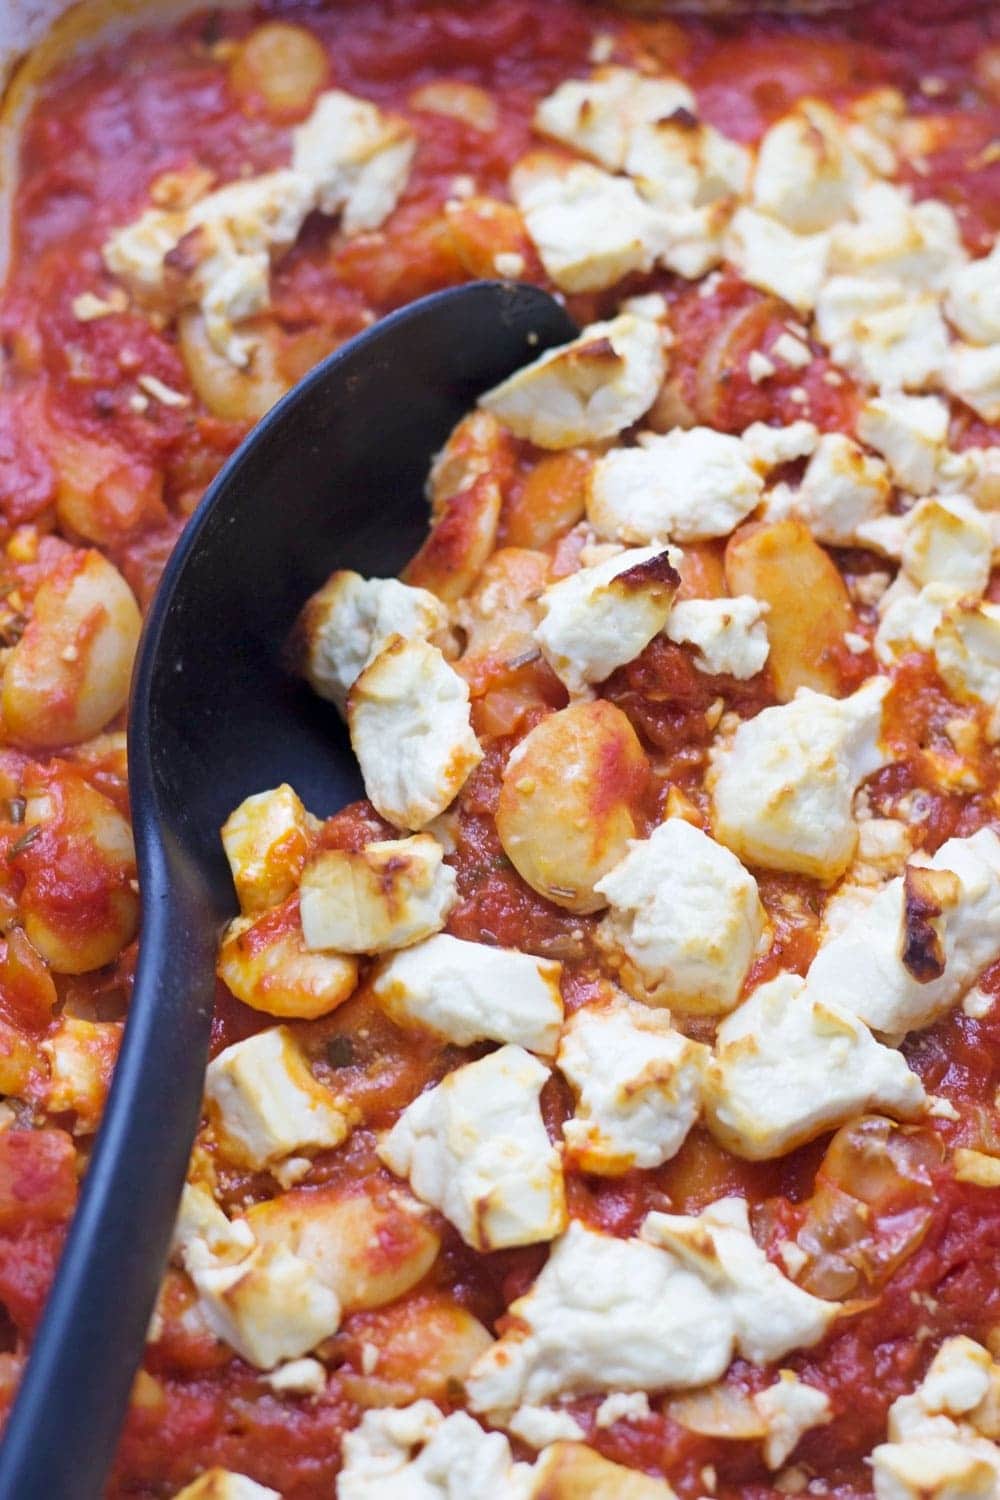 These baked white beans are cooked slowly with feta crumbled over the top then served with garlicky yoghurt and a drizzle of homemade paprika butter.